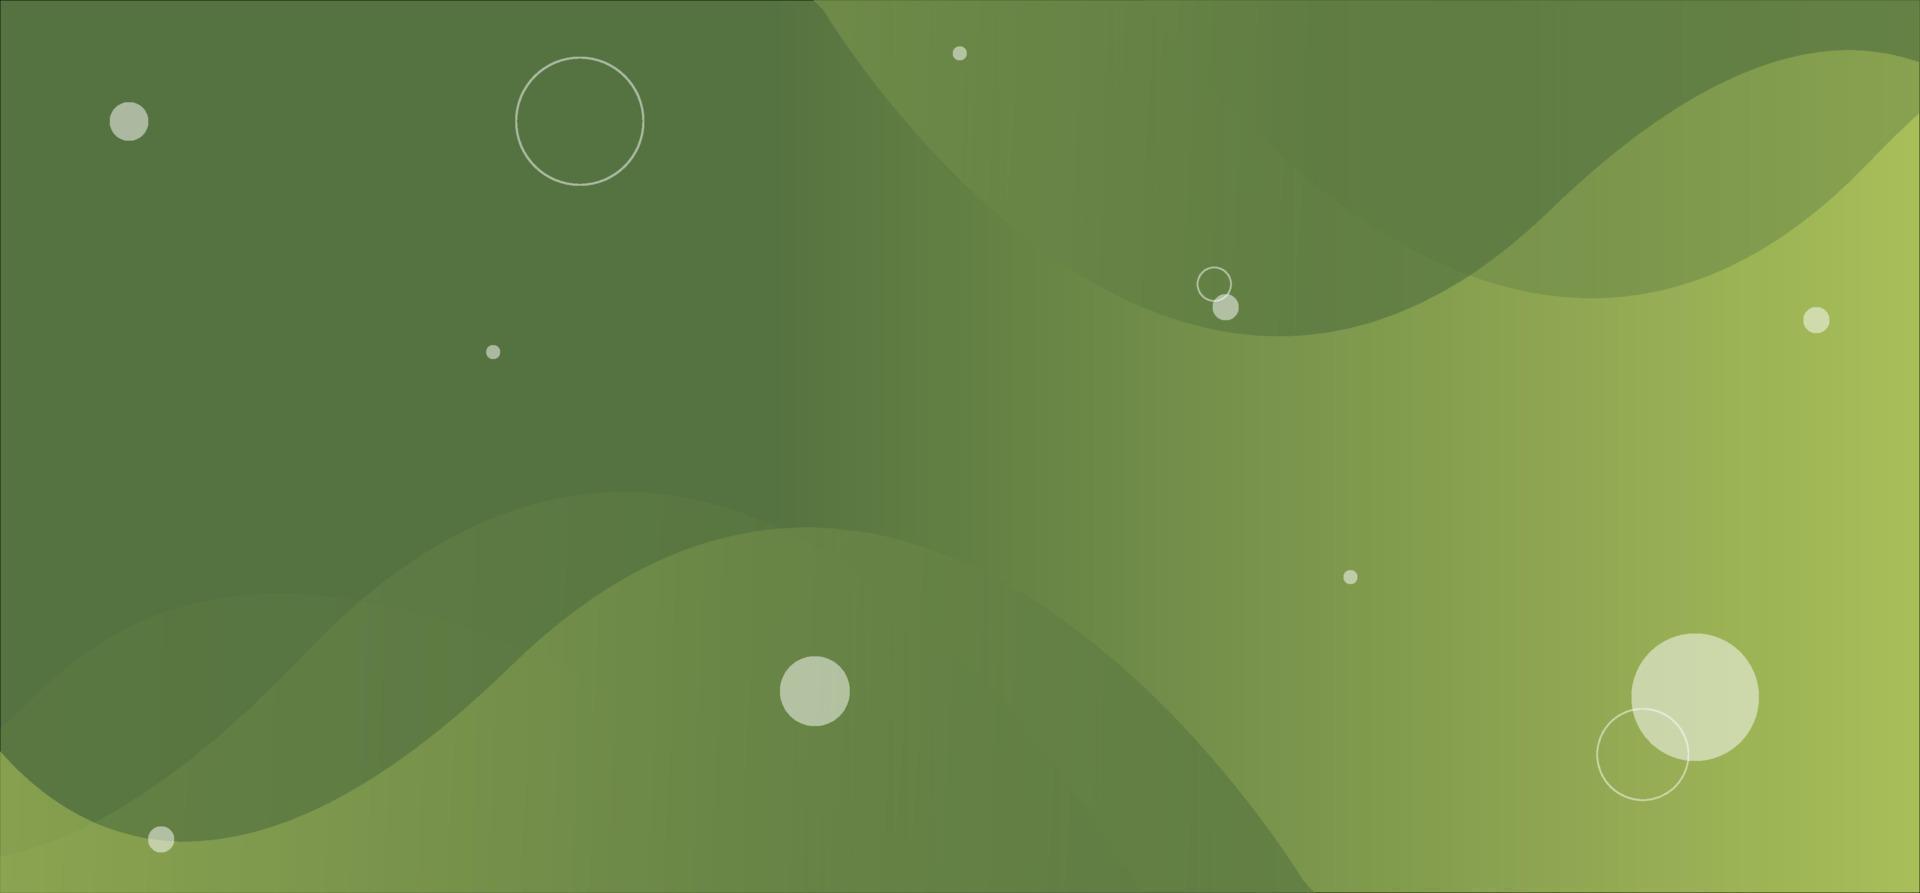 Abstract wavy green background, free vector